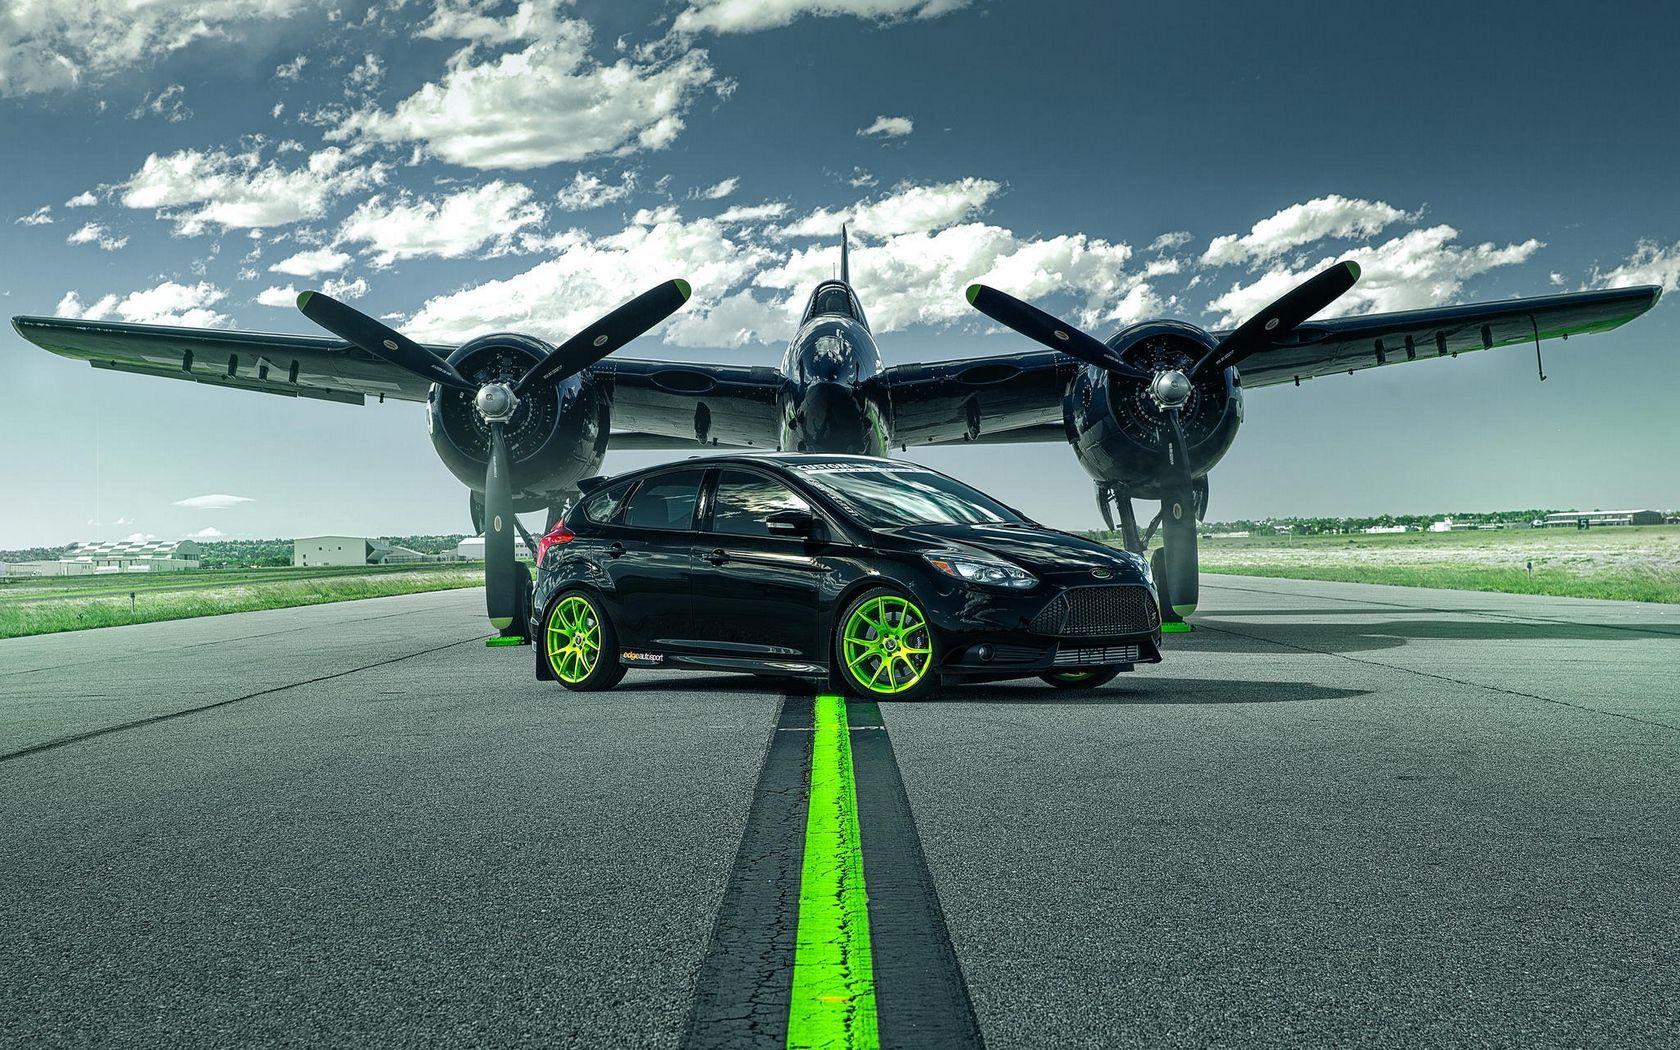 Download wallpaper 1680x1050 ford focus, st, ford, plane, runway